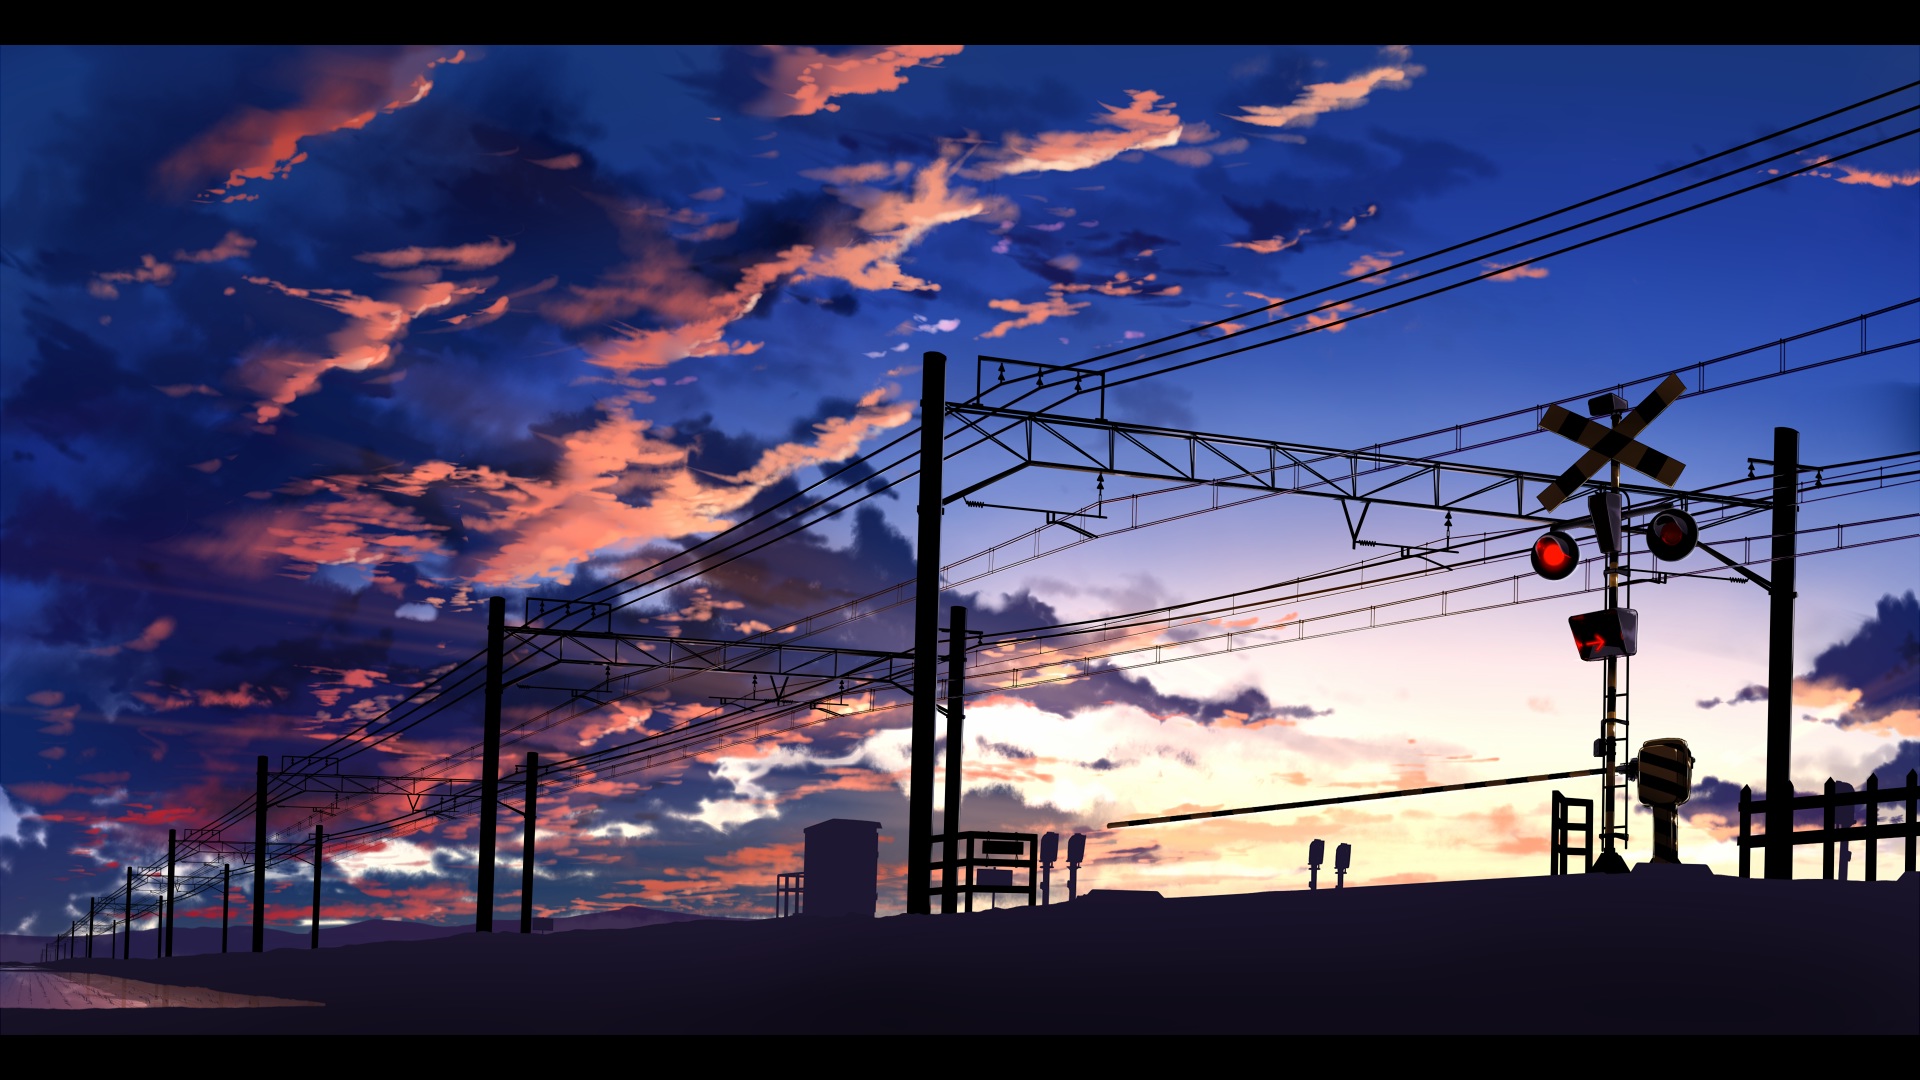 anime, Train Station, Power Lines, Clouds, Traffic Lights, Railway Crossing, Utility Pole Wallpaper